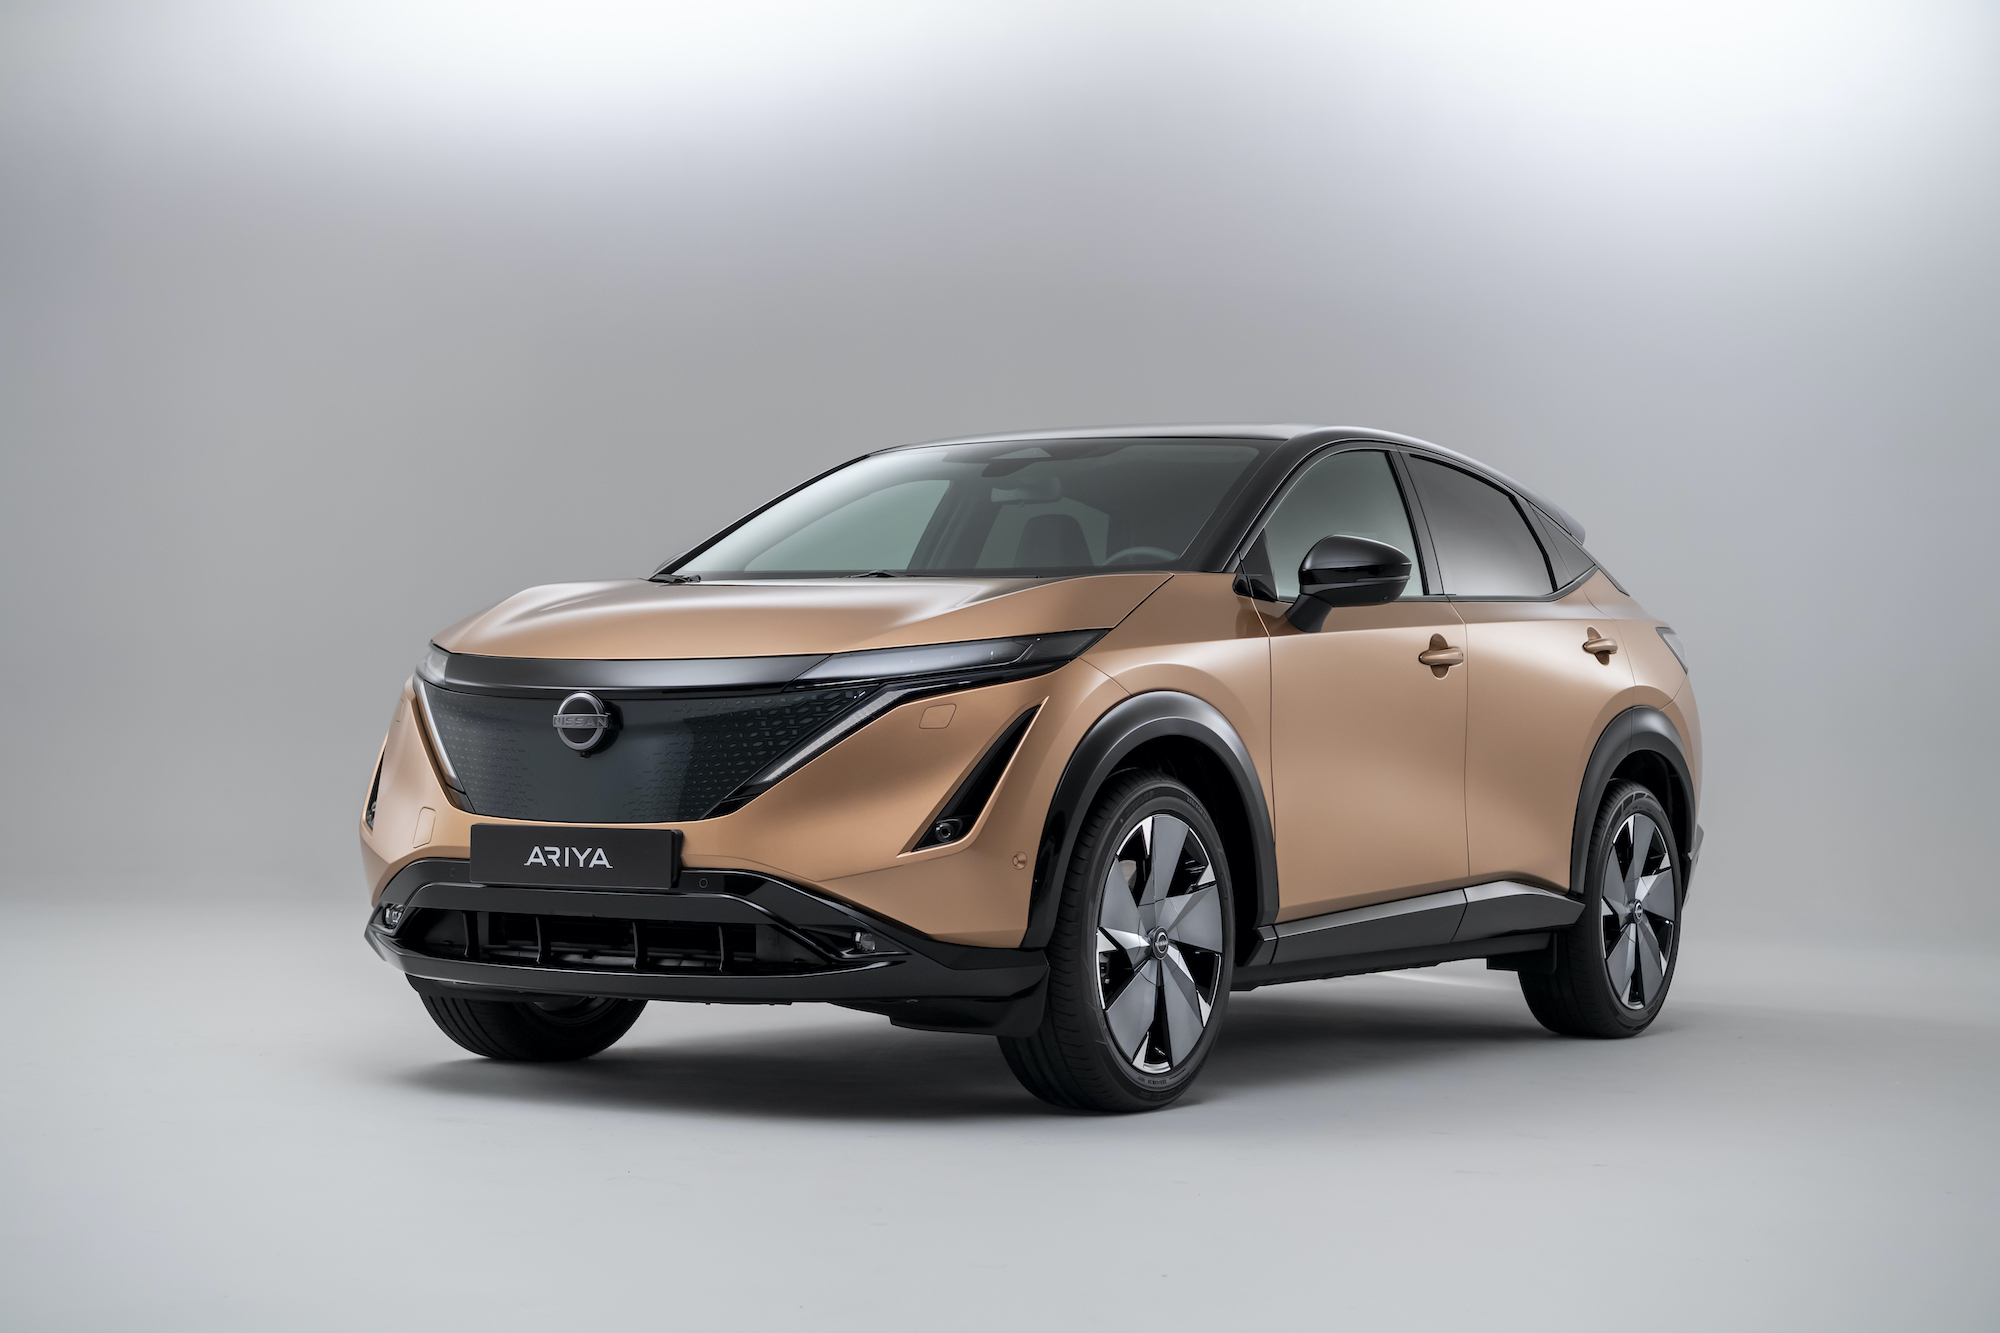 Access all Ariyas we take a look at the new Nissan allelectric SUV